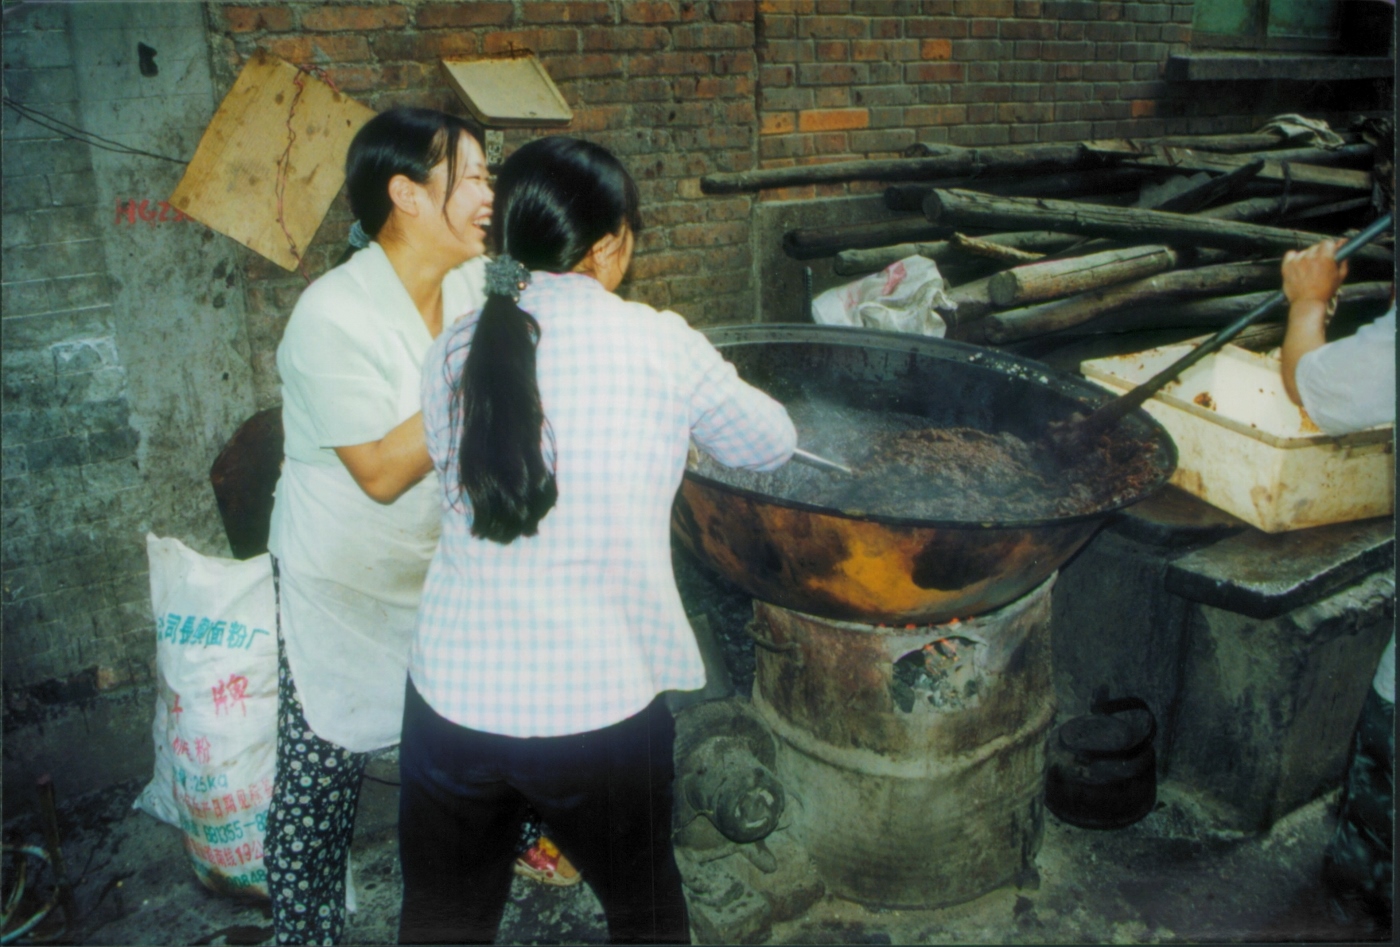 cooking with large pot china 1999